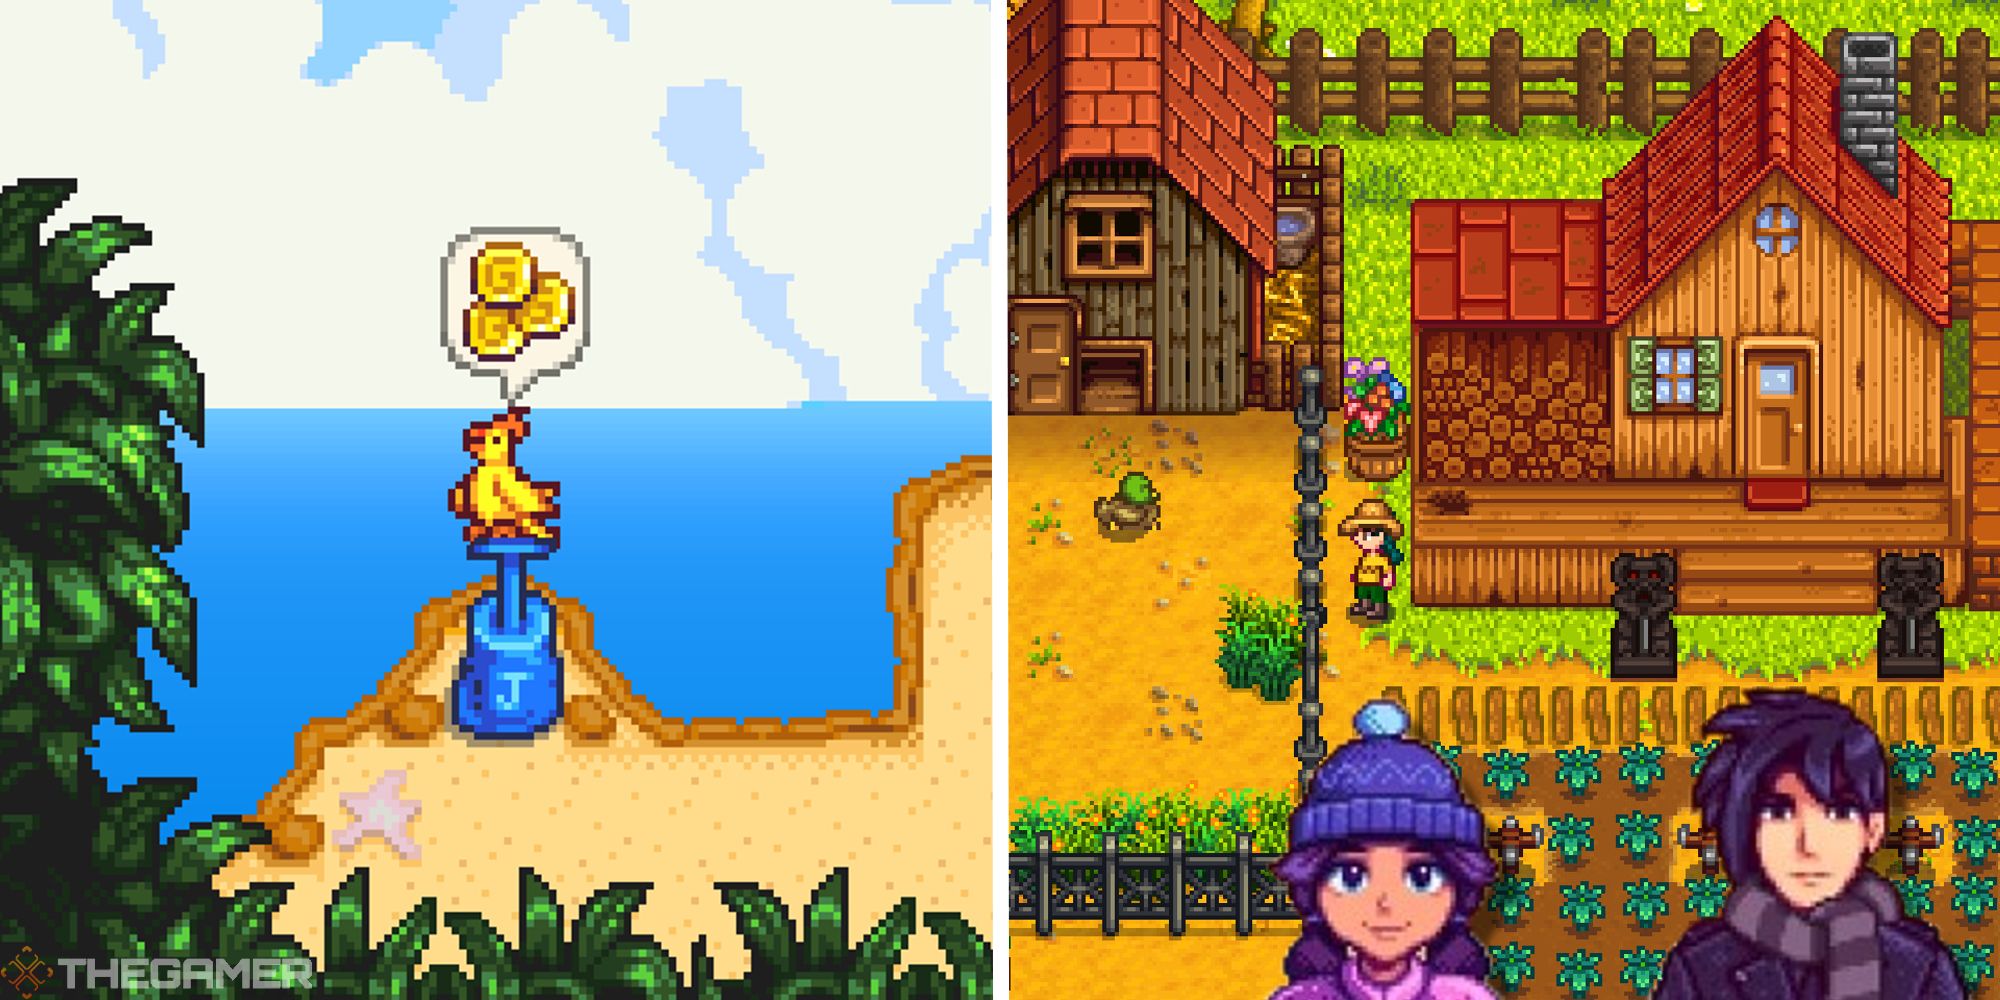 split image showing golden parrot next to image of farm with jas and sebastian wearing winter clothes